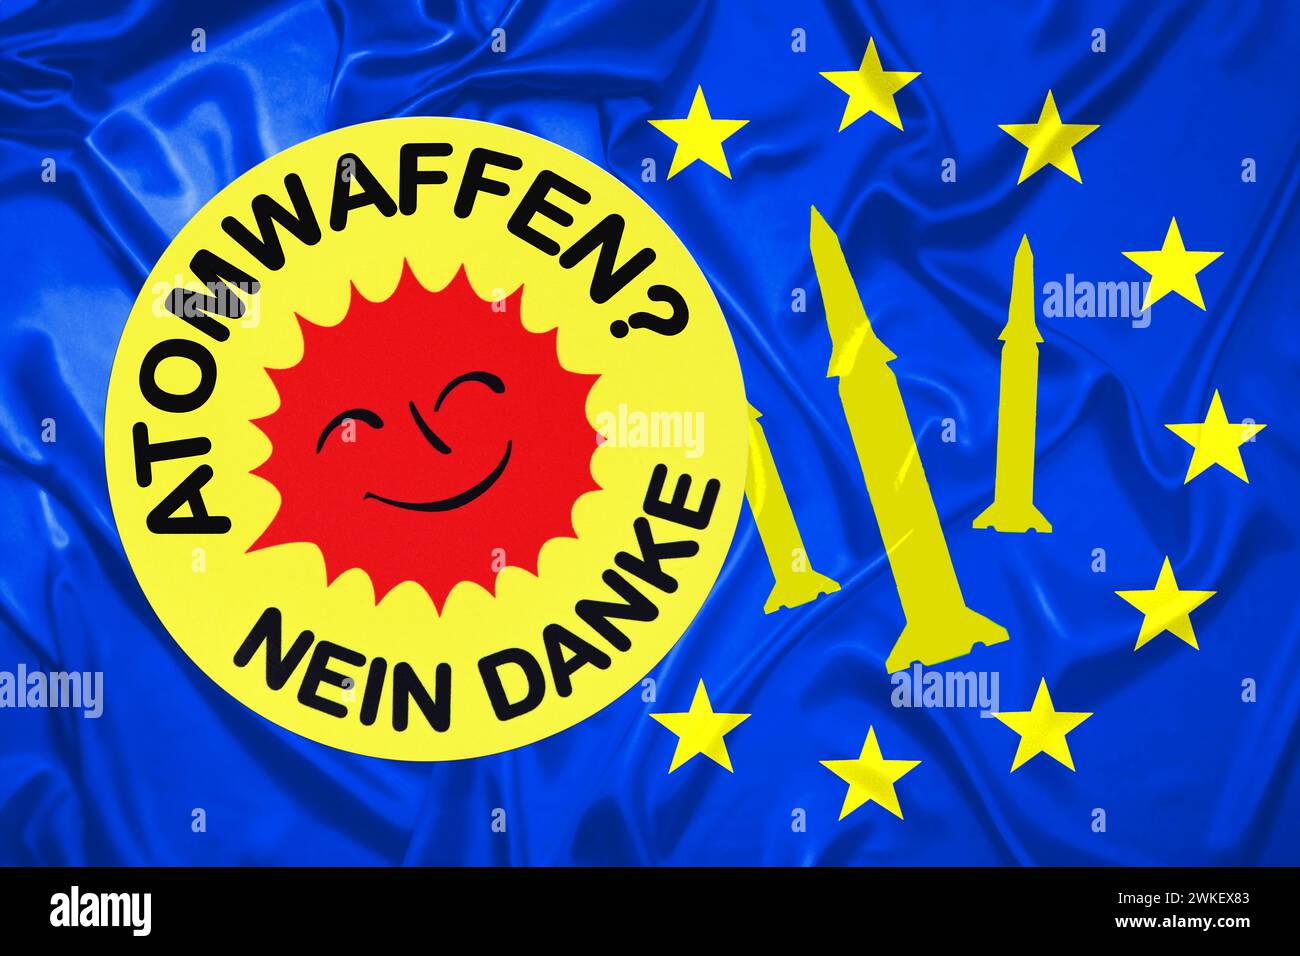 Nuclear Weapons Sticker? - No Thanks On EU Flag, Photo Montage Stock Photo